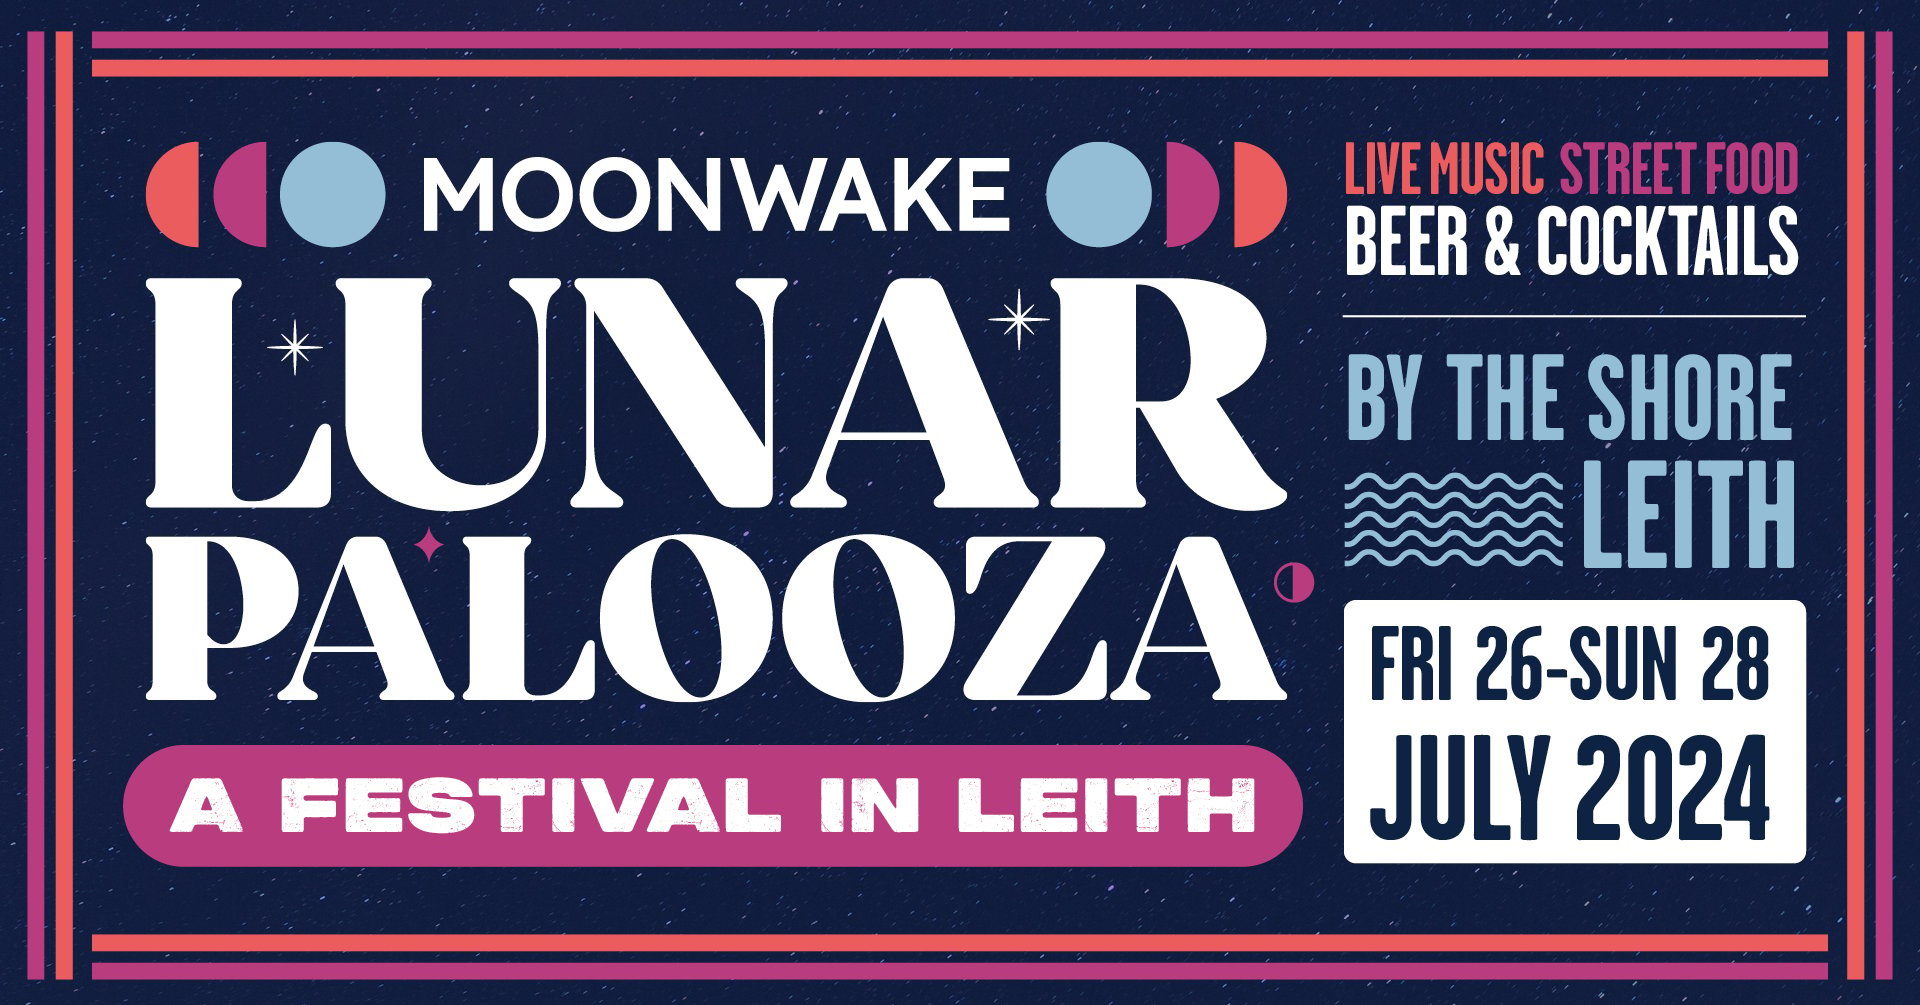 Event poster for Lunarpalooza at Moonwake Beer